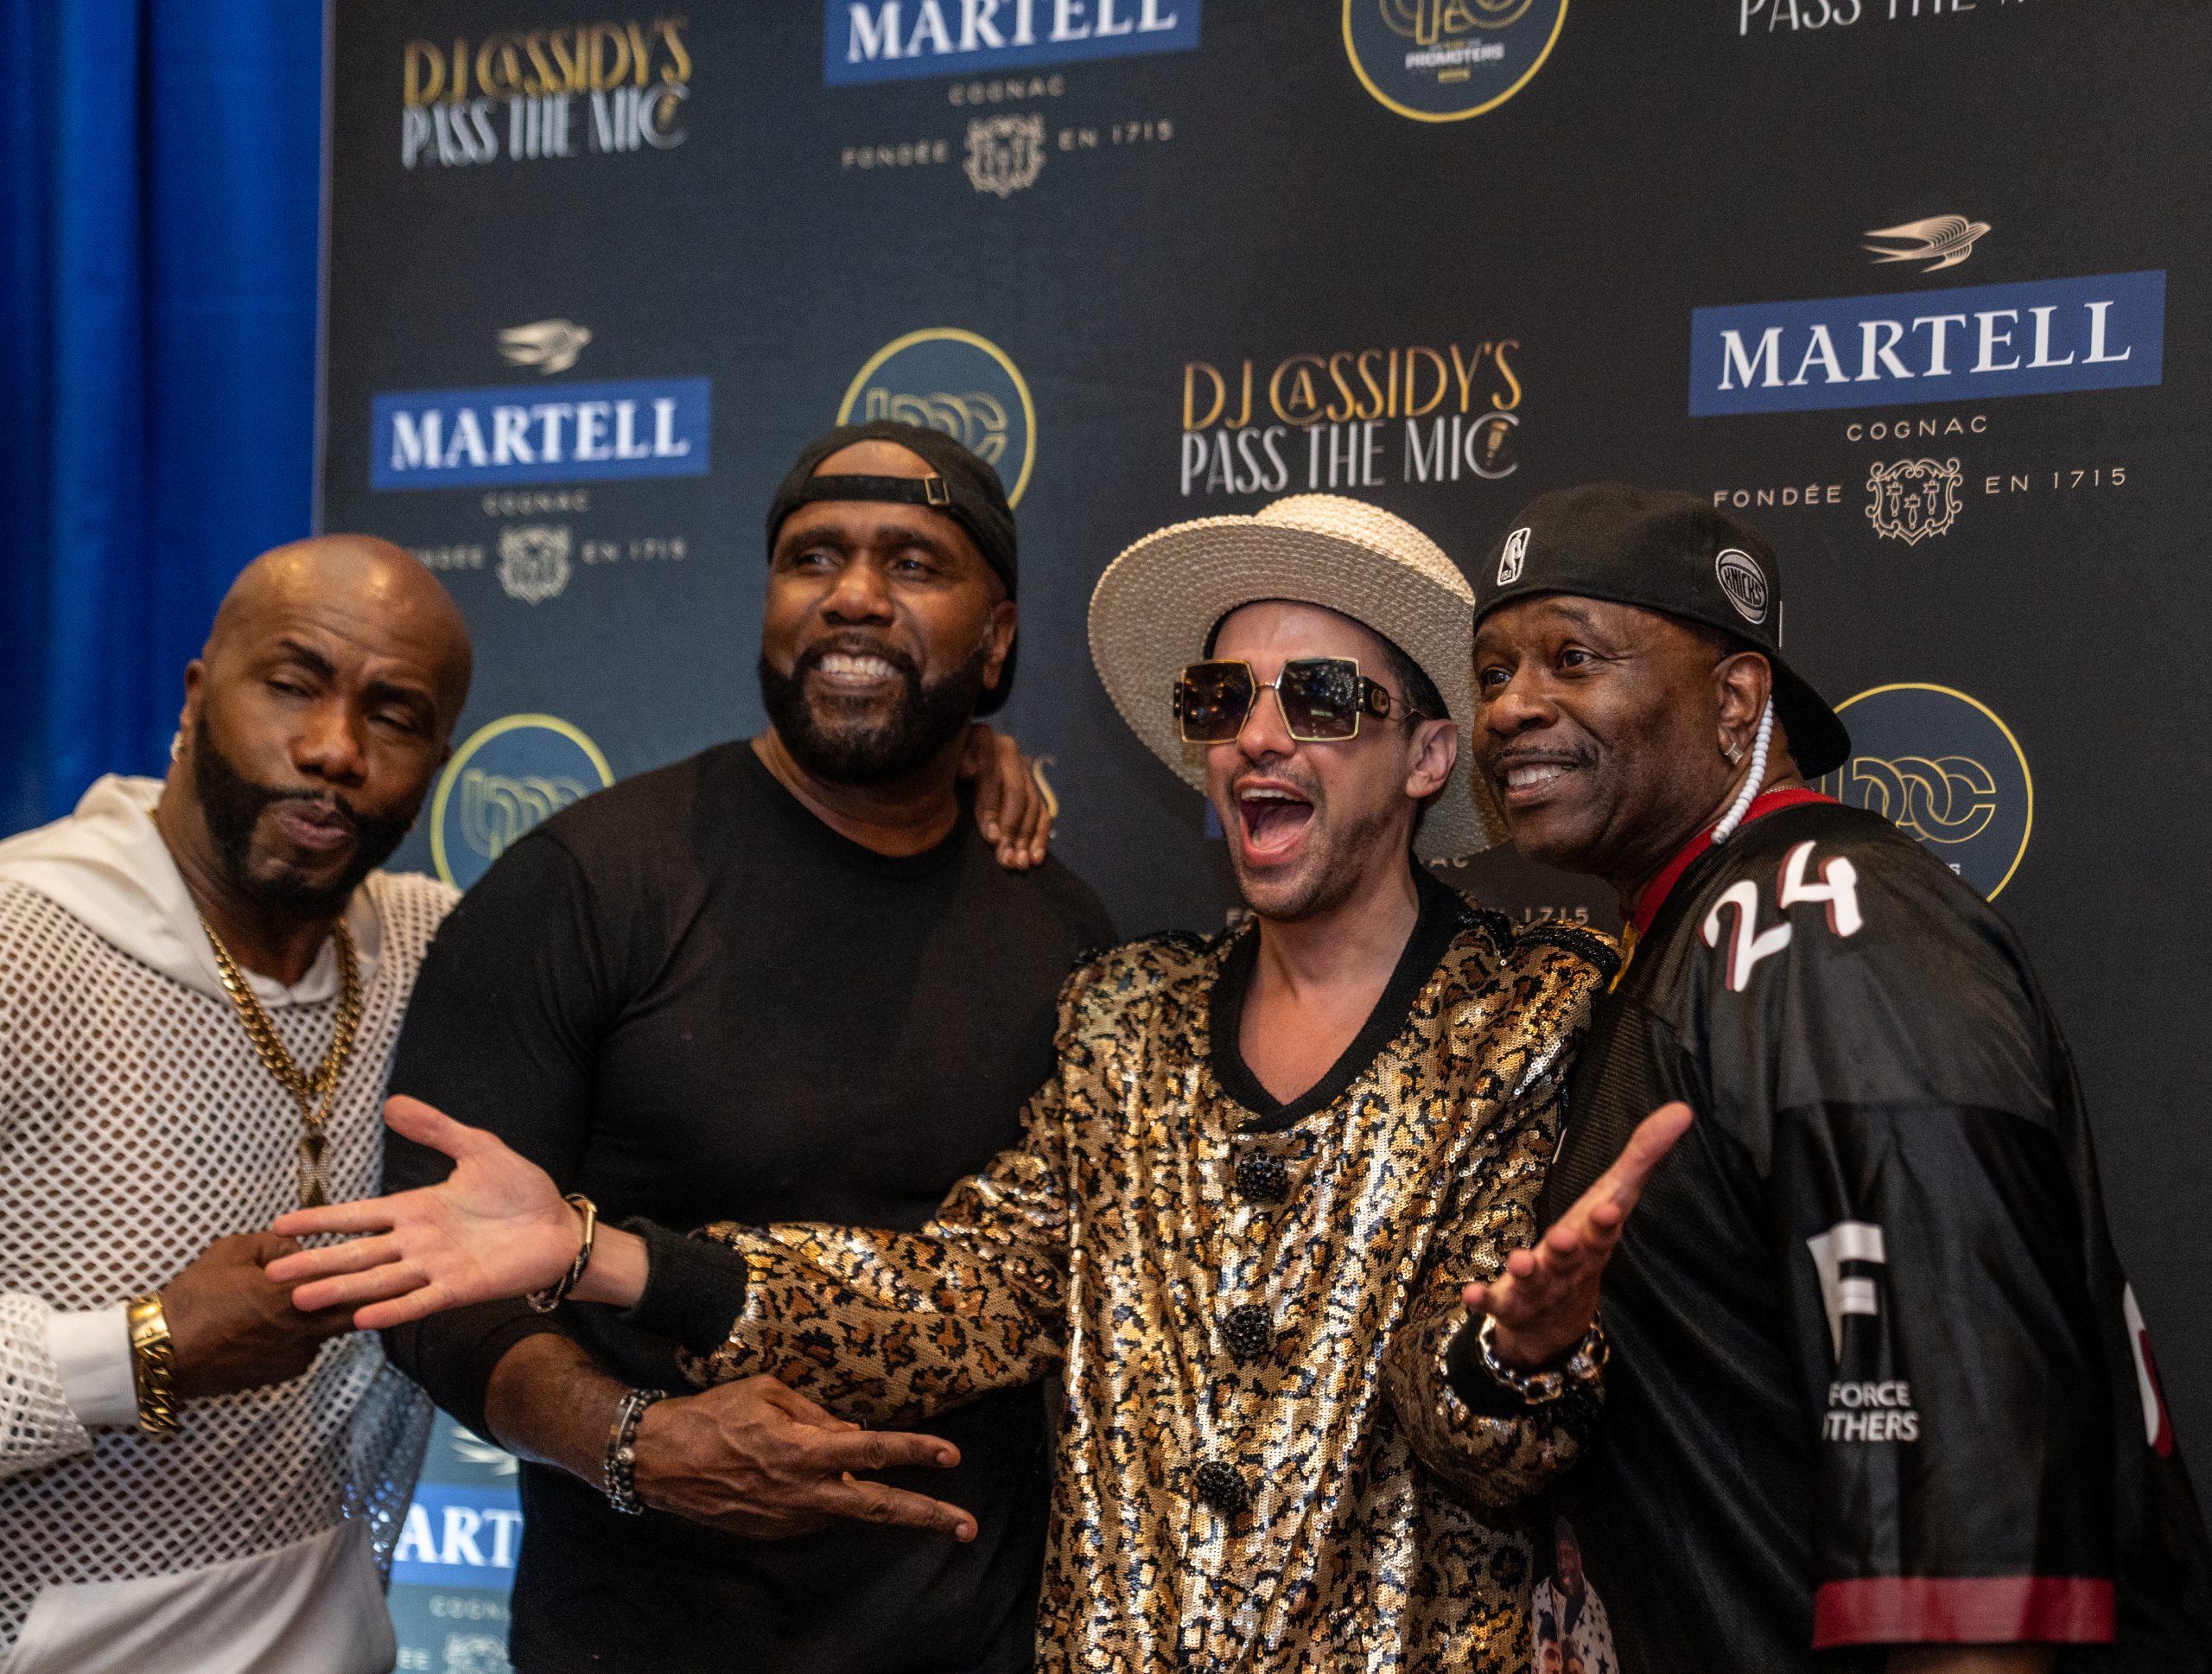 Full Force + DJ Cassidy - Martell Cognac, The Black Promoters Collective, and Power 105.1 present DJ Cassidy's Pass The Mic LIVE at Radio City Music Hall in NYC